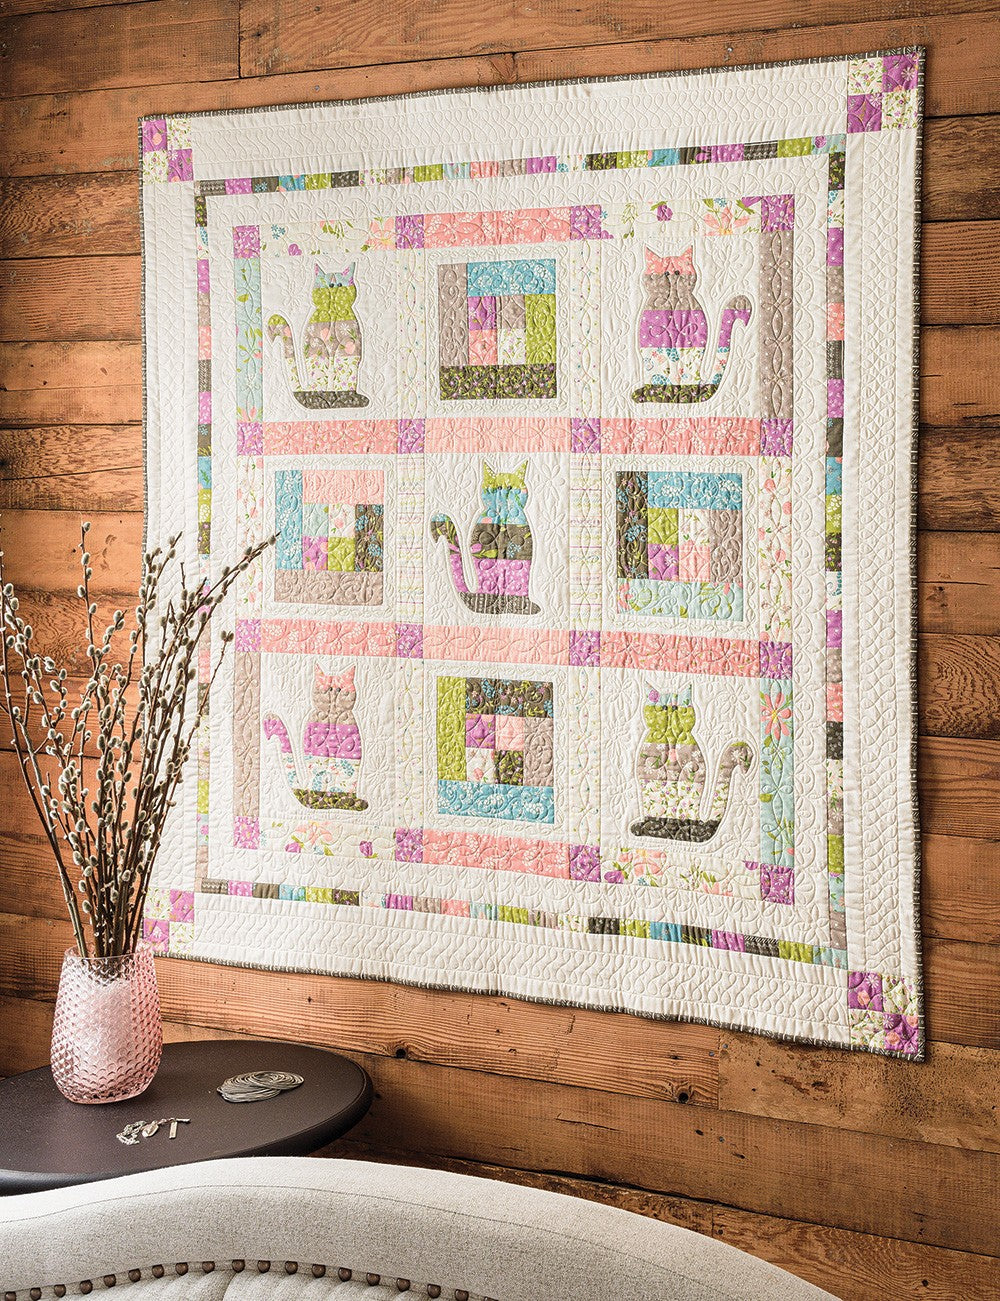 On a Roll Again!: 14 Creative Quilts from Jelly Rolls